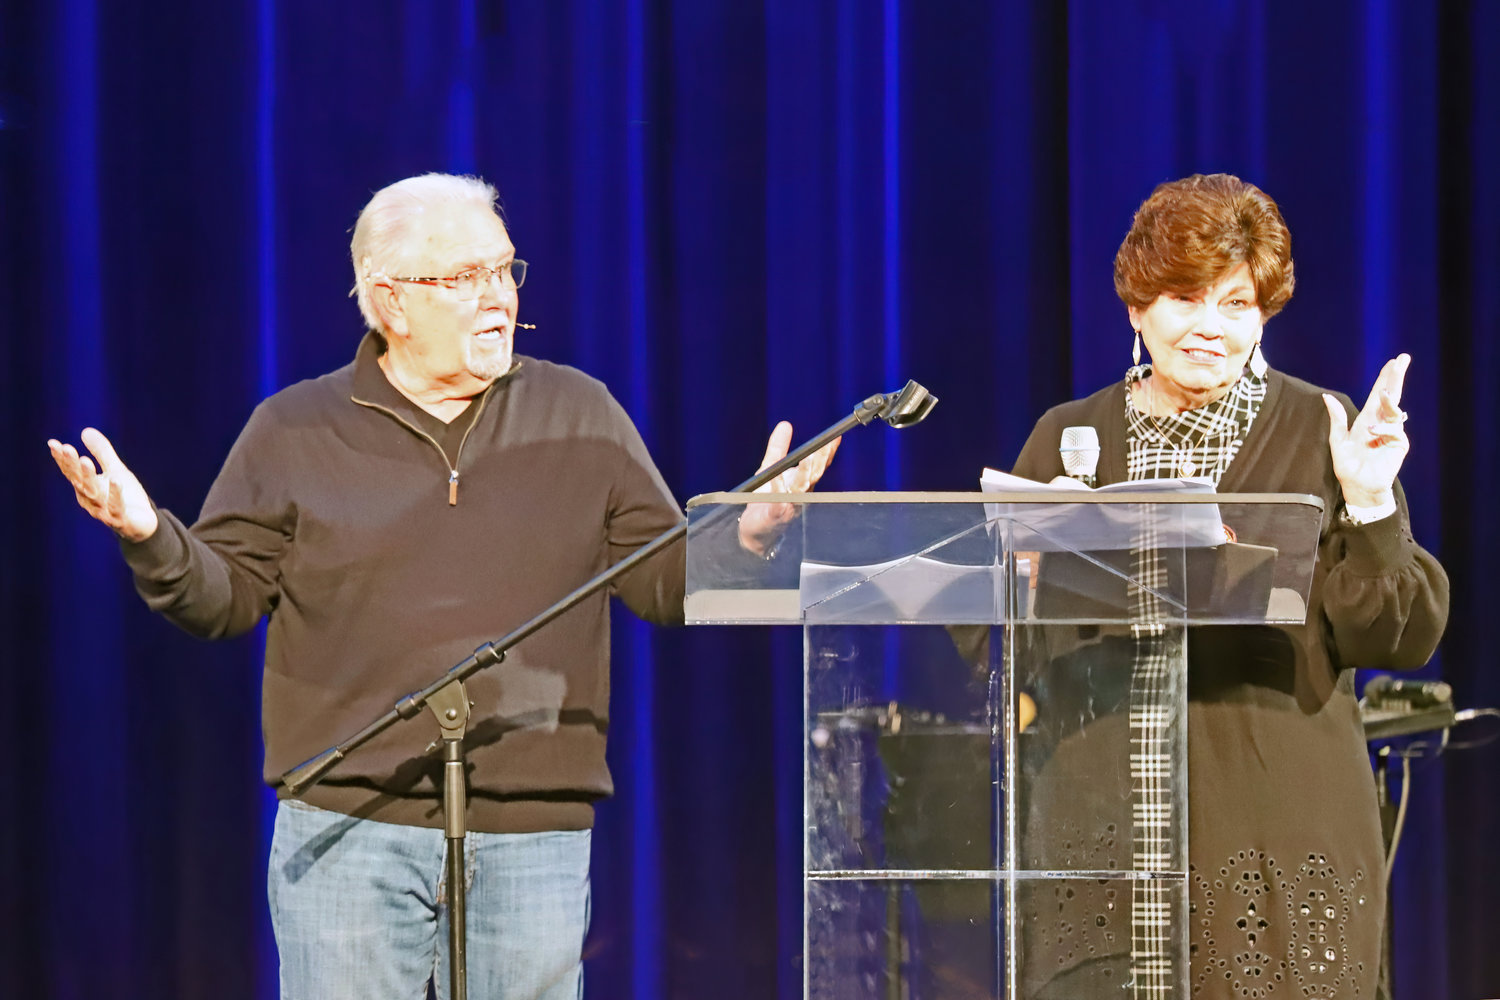 Dr. Mike (DOM) and Judy Carlisle welcomed all hands to the San Diego Southern Baptist Association 80th Anniversary on Saturday January 14, 2023, El Cajon, CA.